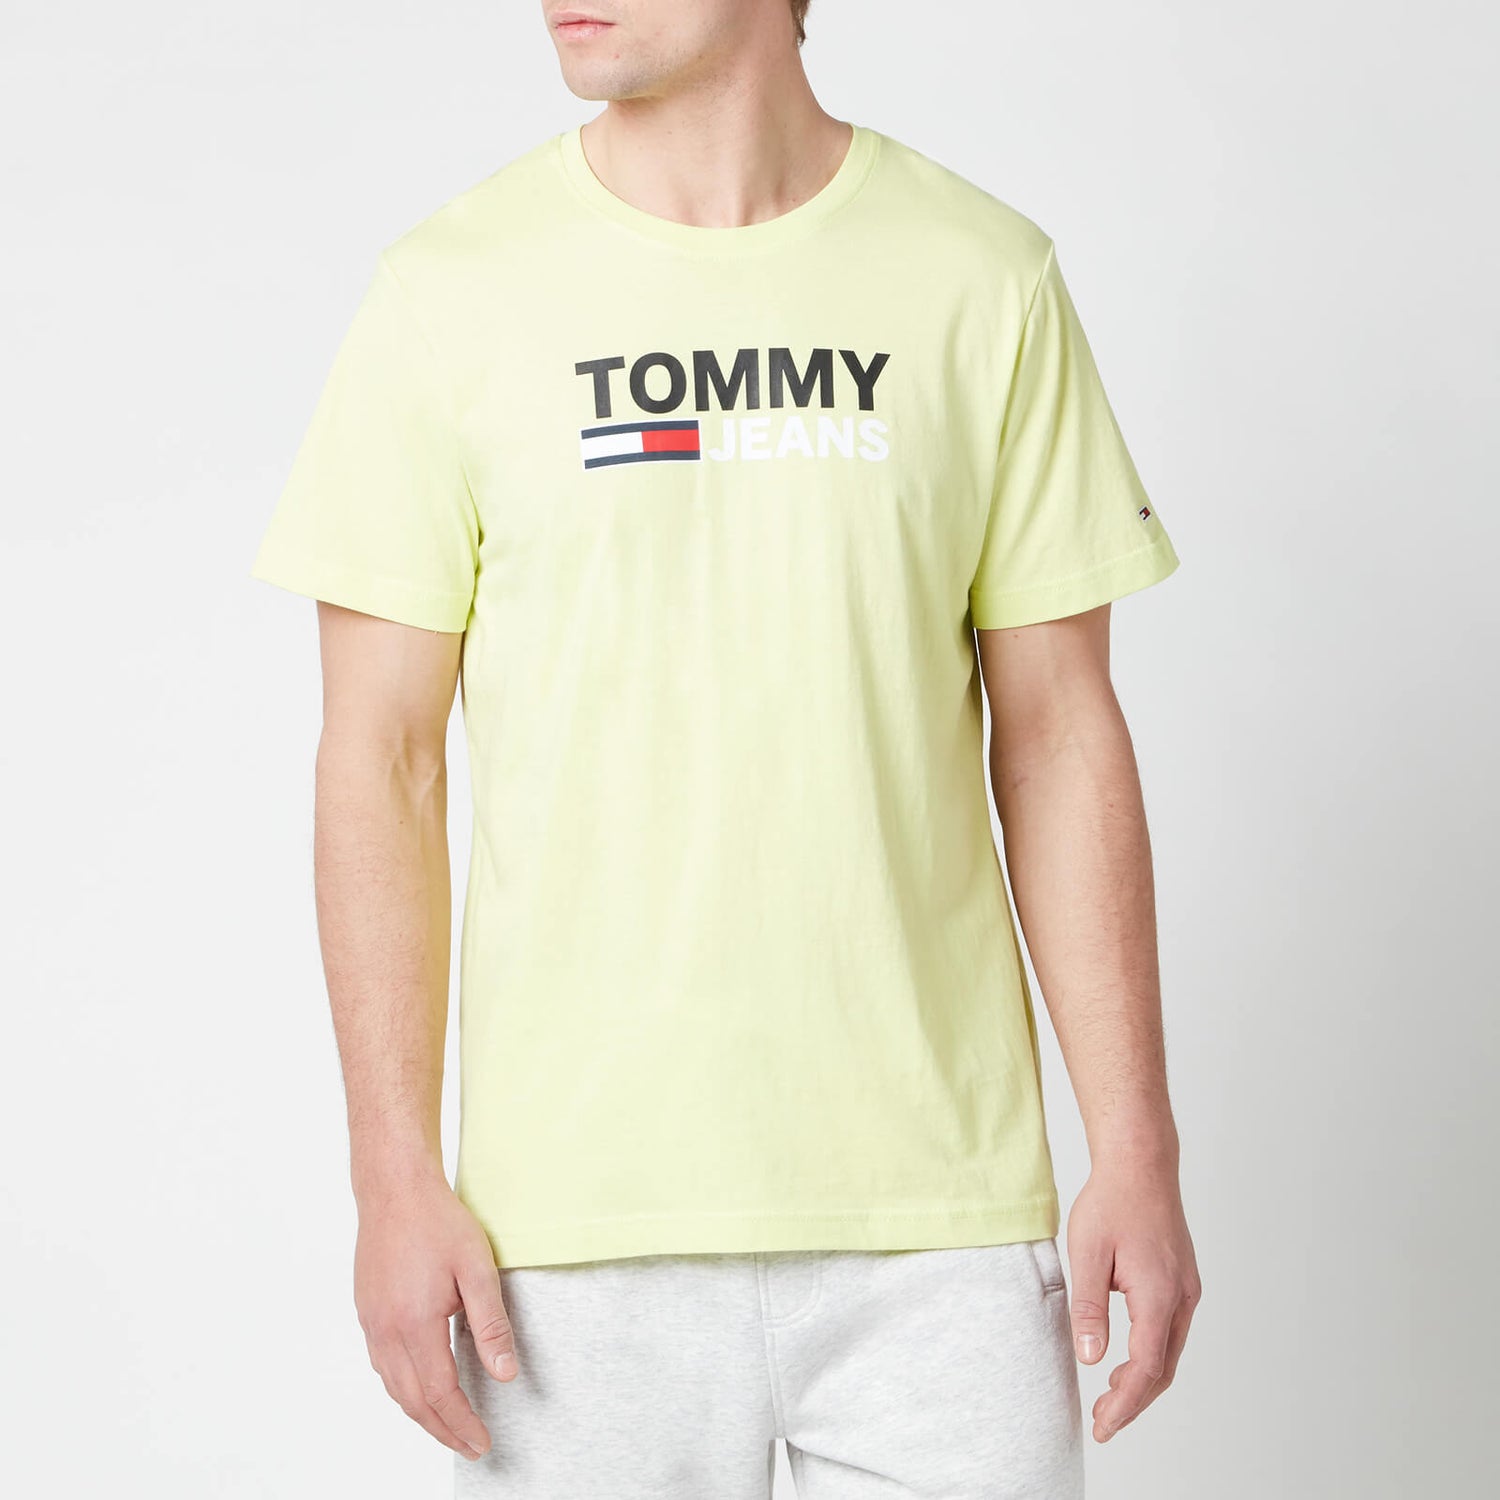 Tommy Jeans Men's Corporation Logo T-Shirt - Faded Lime